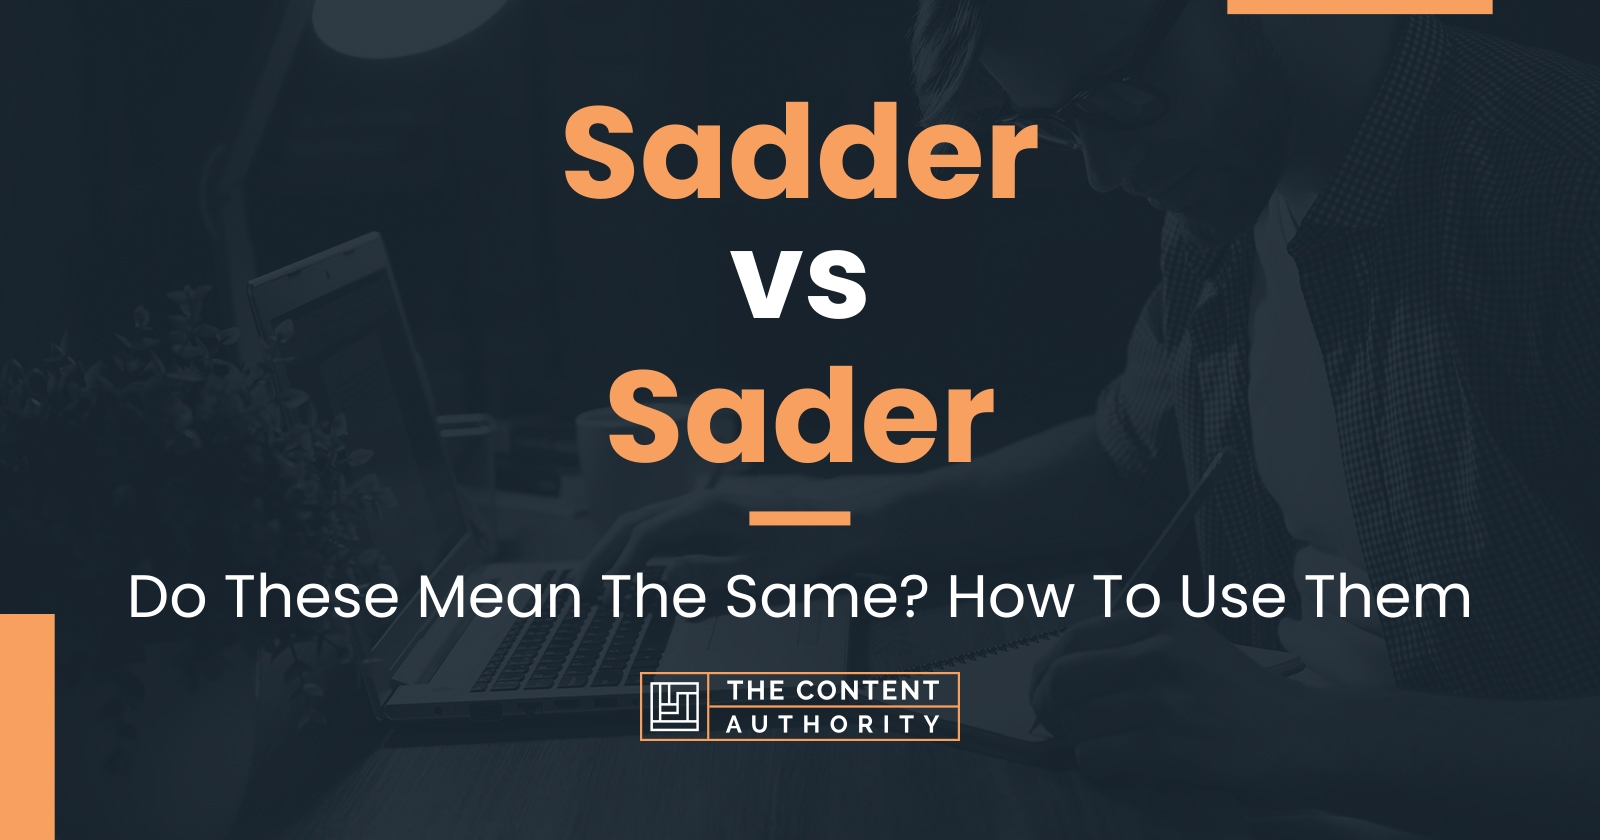 Sadder vs Sader: Do These Mean The Same? How To Use Them